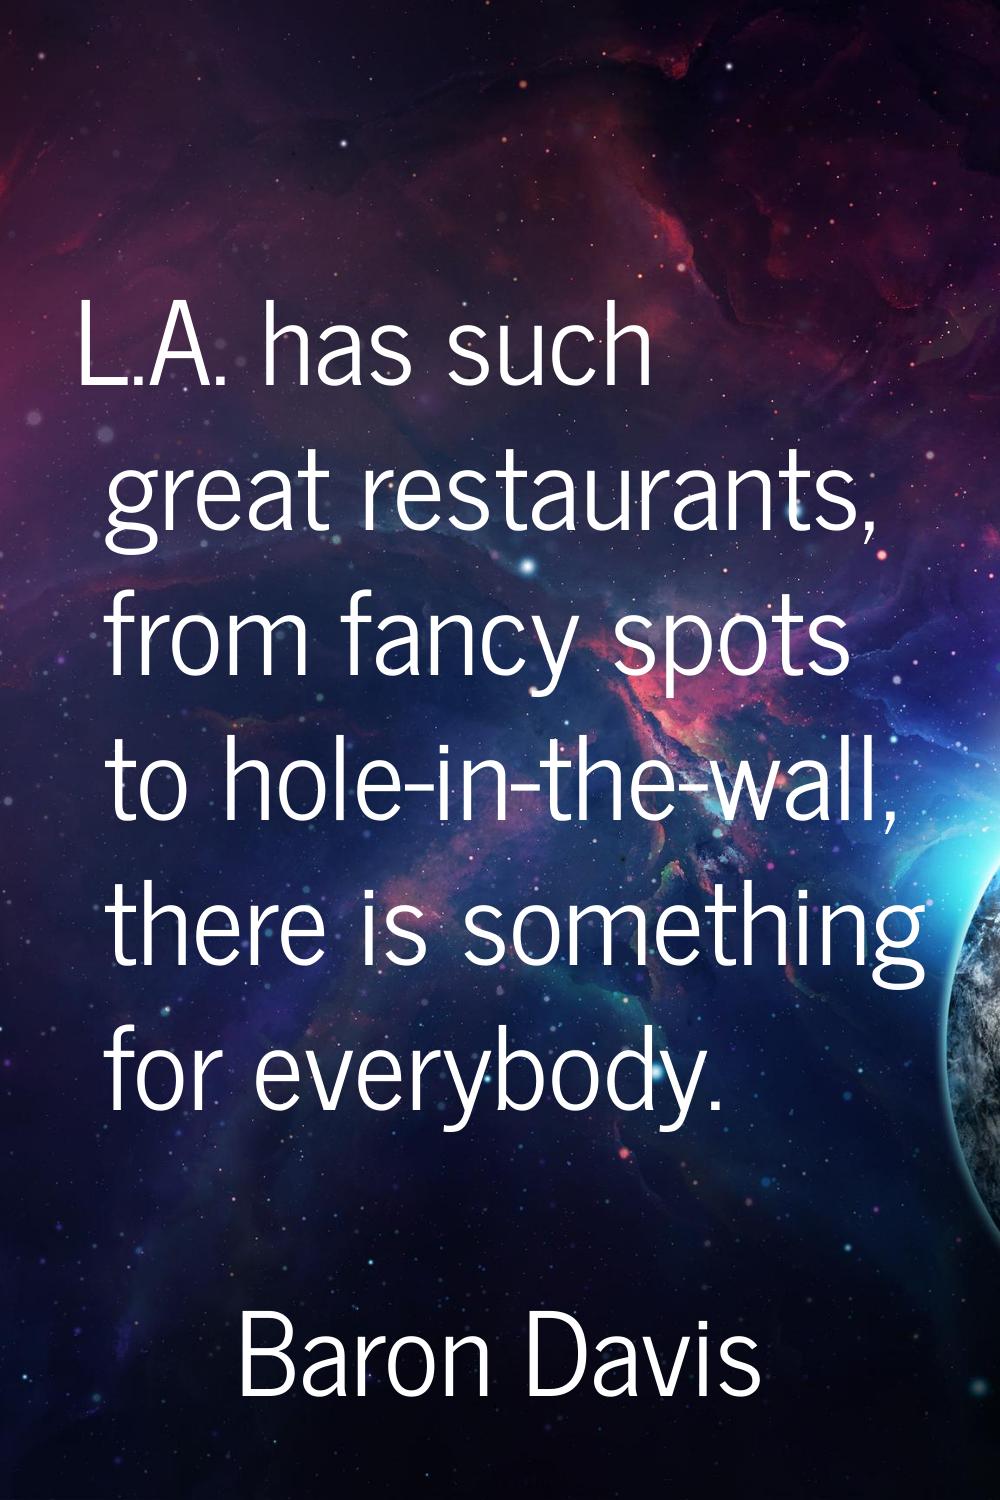 L.A. has such great restaurants, from fancy spots to hole-in-the-wall, there is something for every